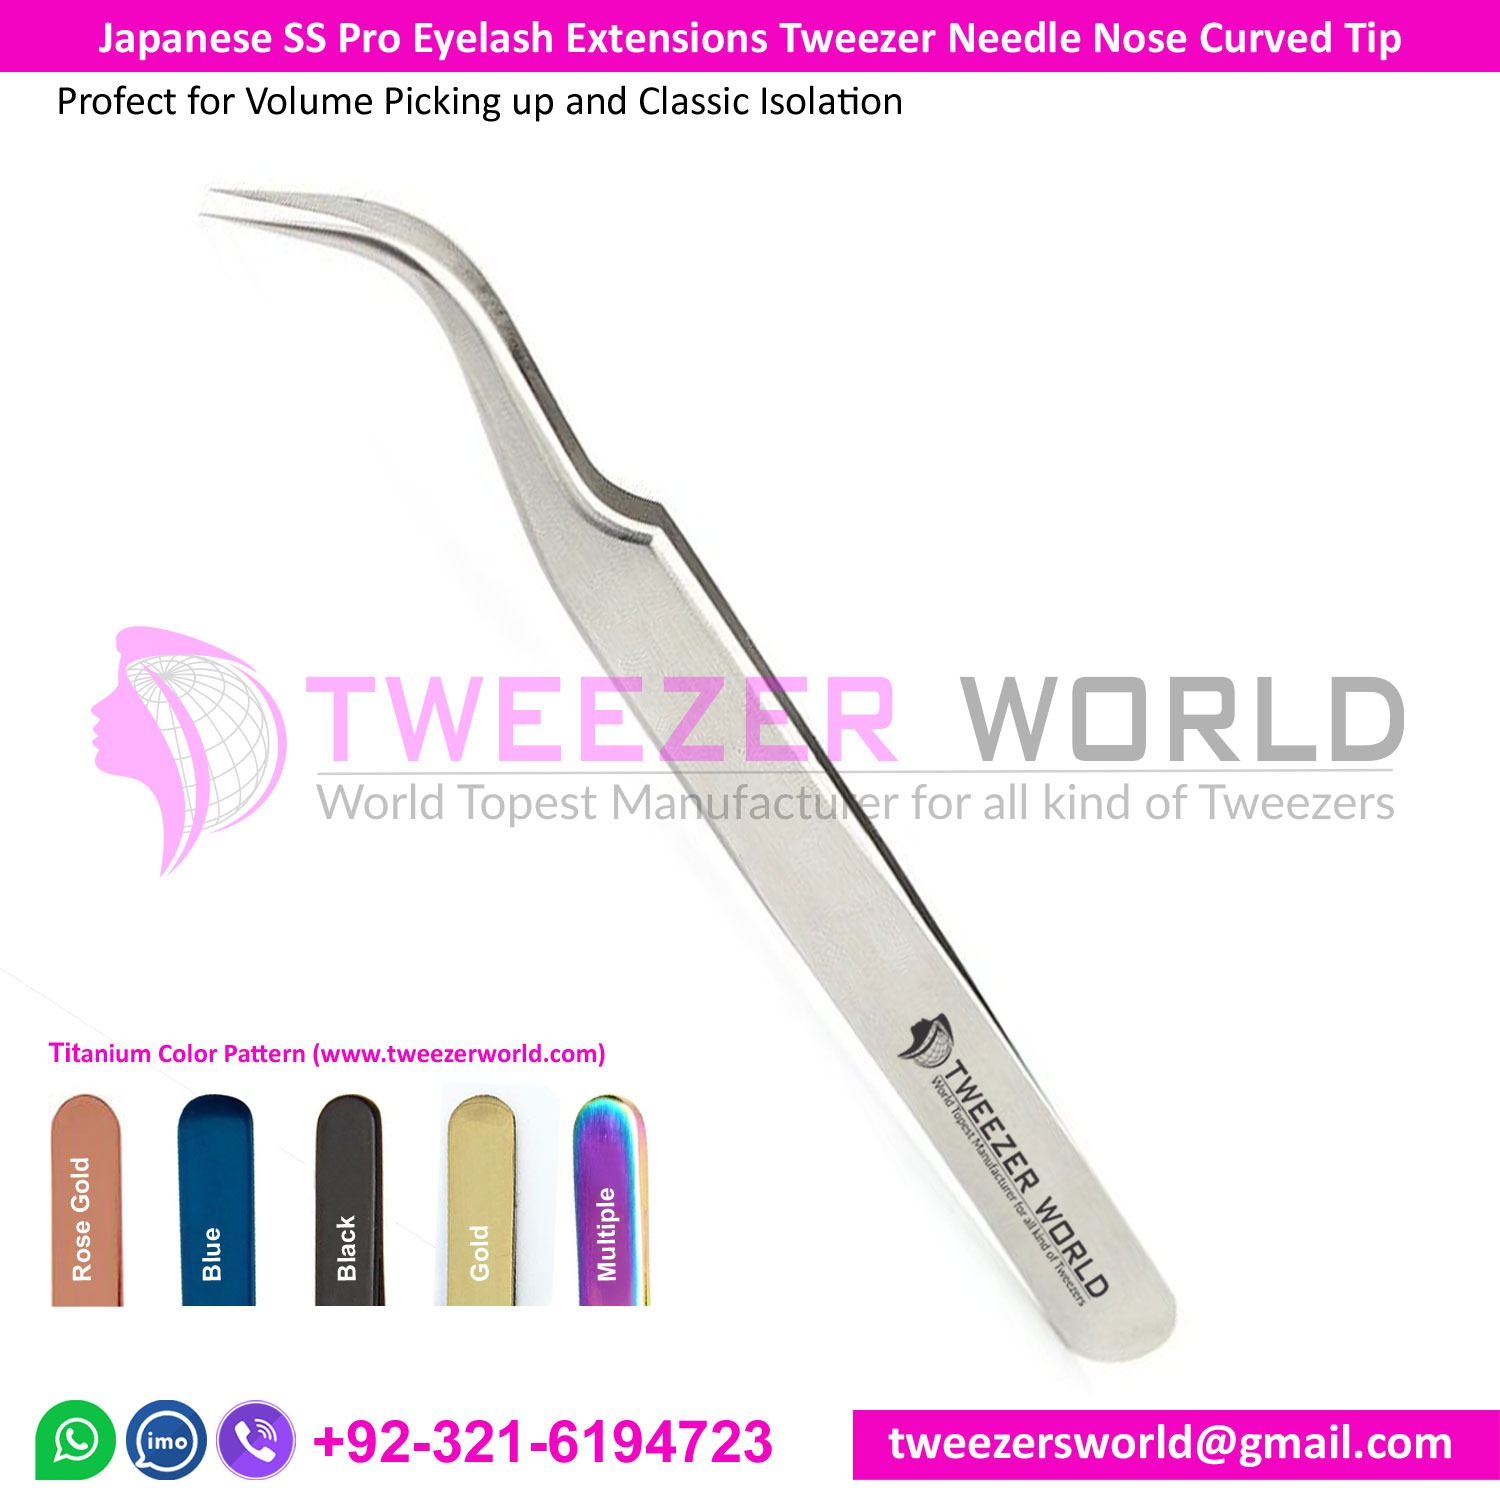 Tweezer Needle Nose Curved Long Tip for Picking up or Isolation